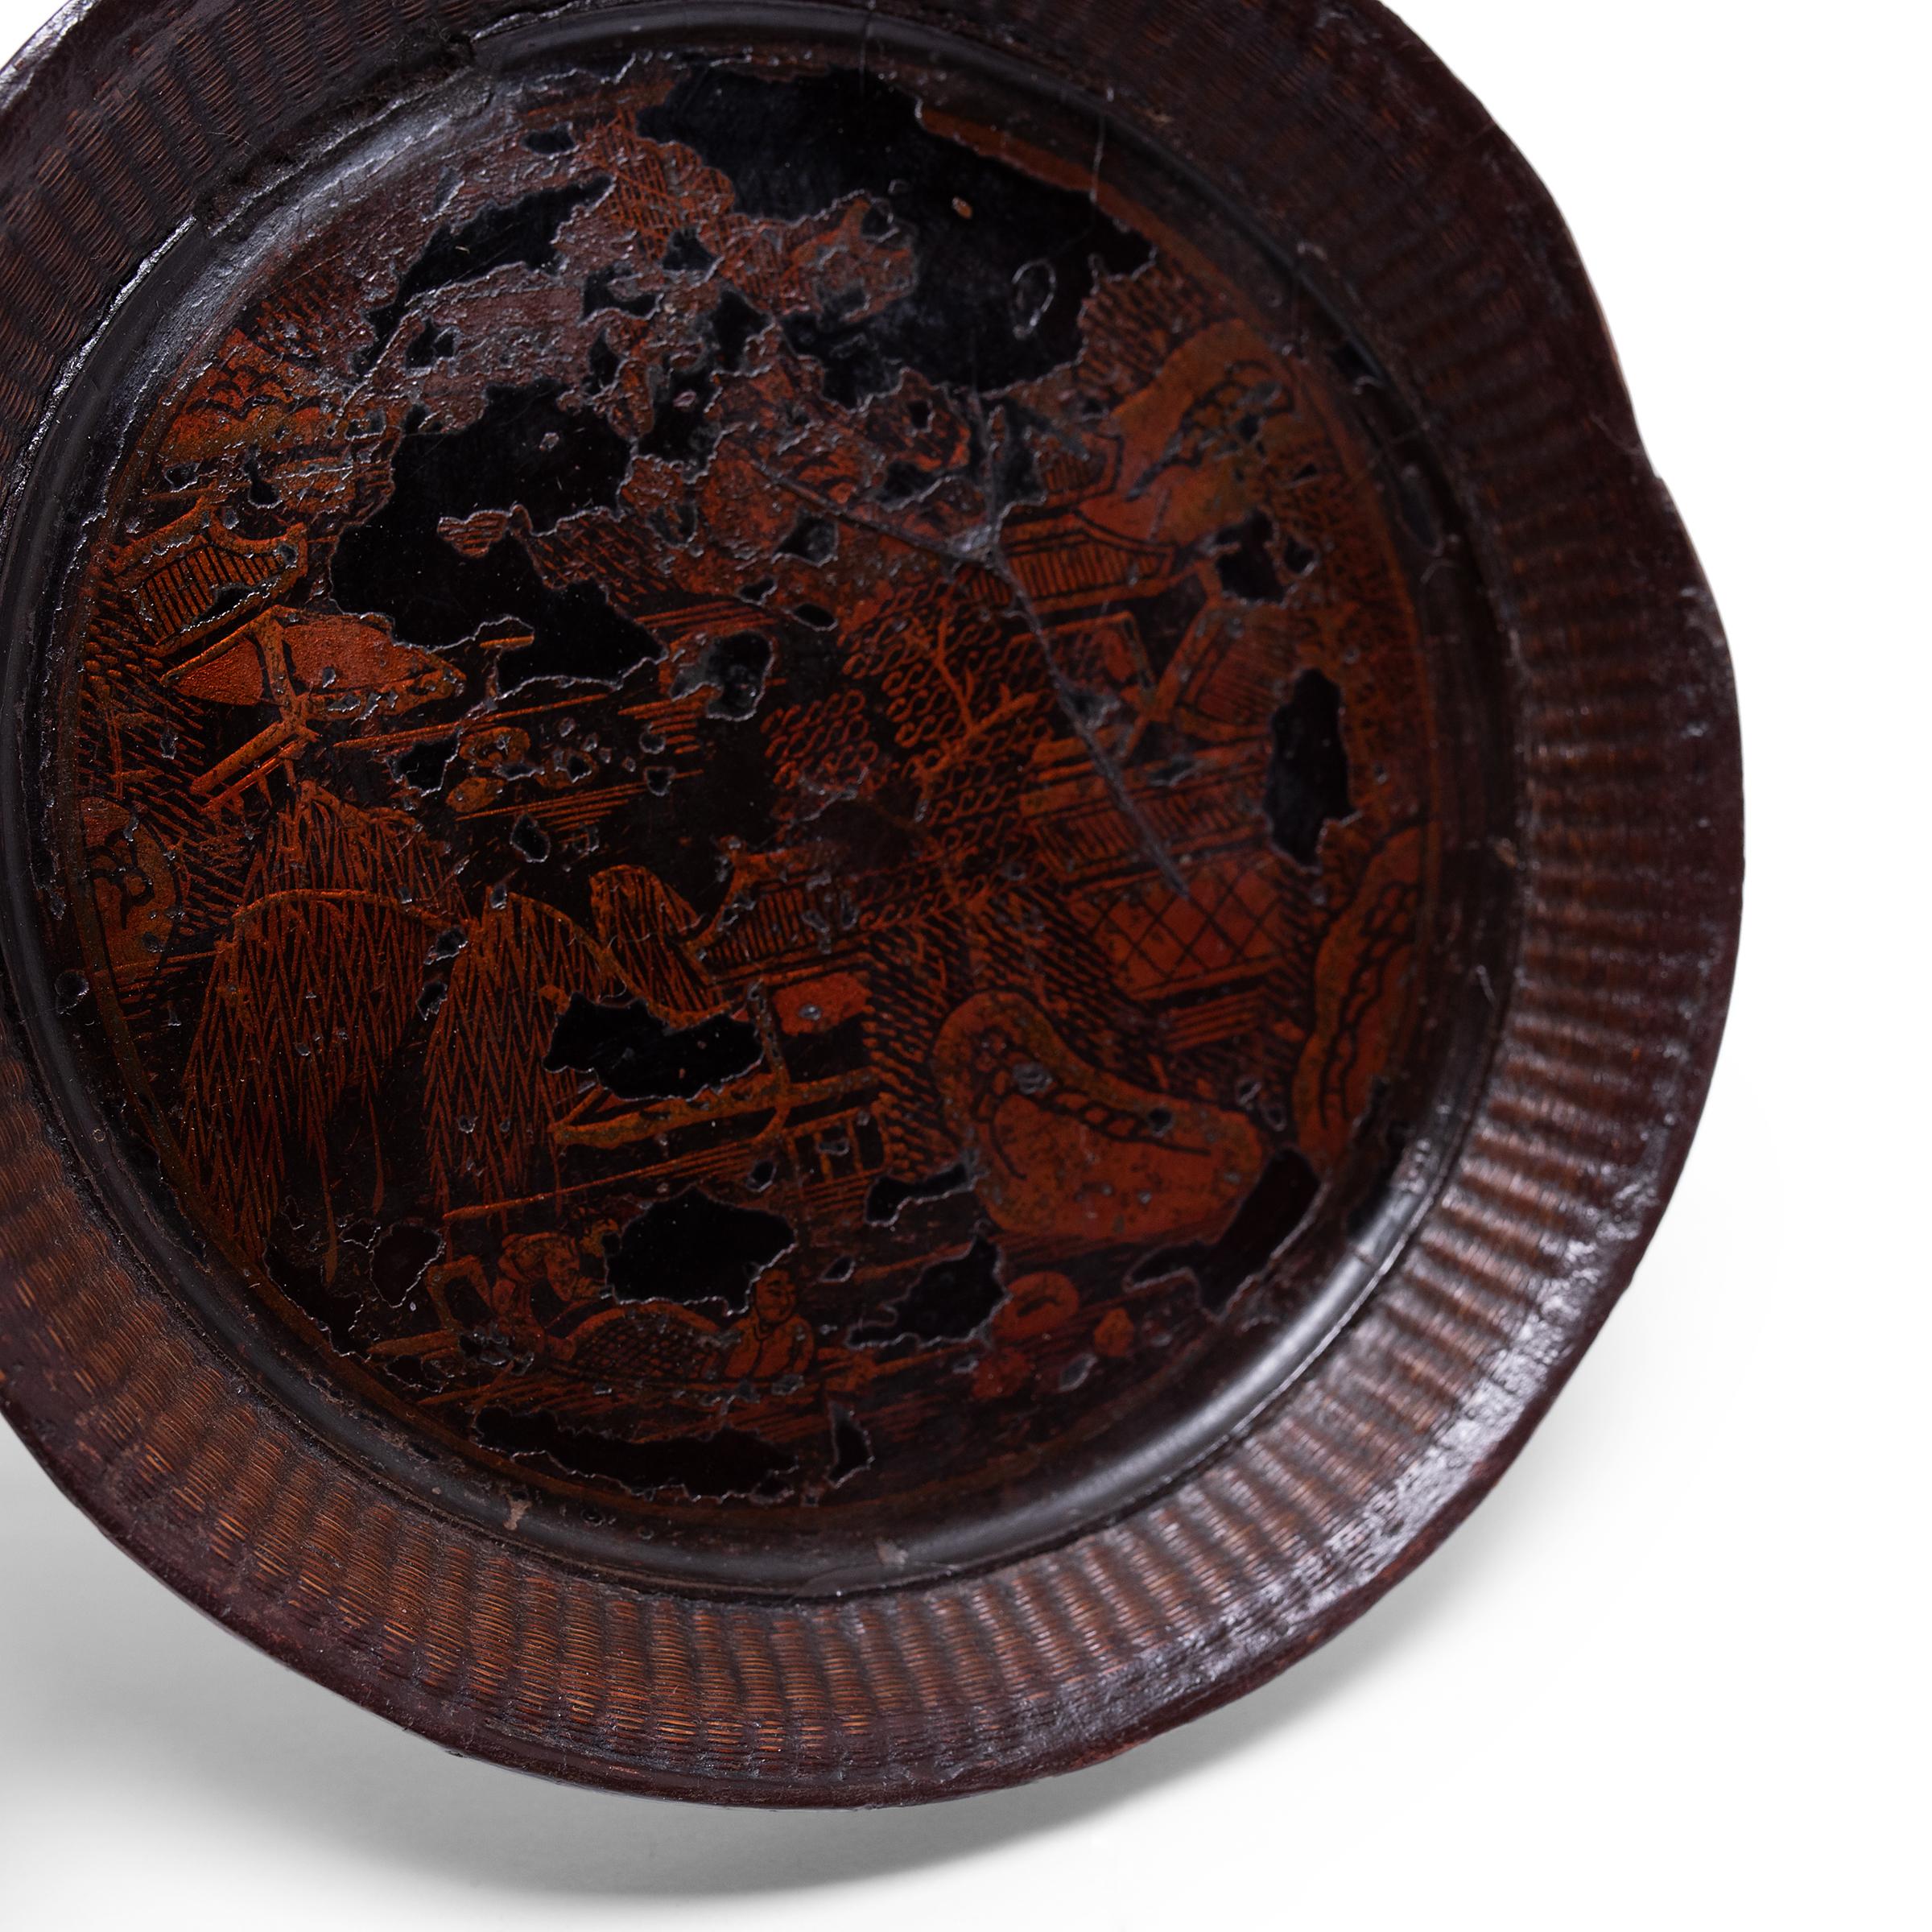 Dated to the mid-19th century, this small, round tray was likely once used as a shallow offering bowl atop a home altar. Comprised of finely woven bamboo sides and a thin wooden base, the plate is coated with dark black lacquer and decorated with a